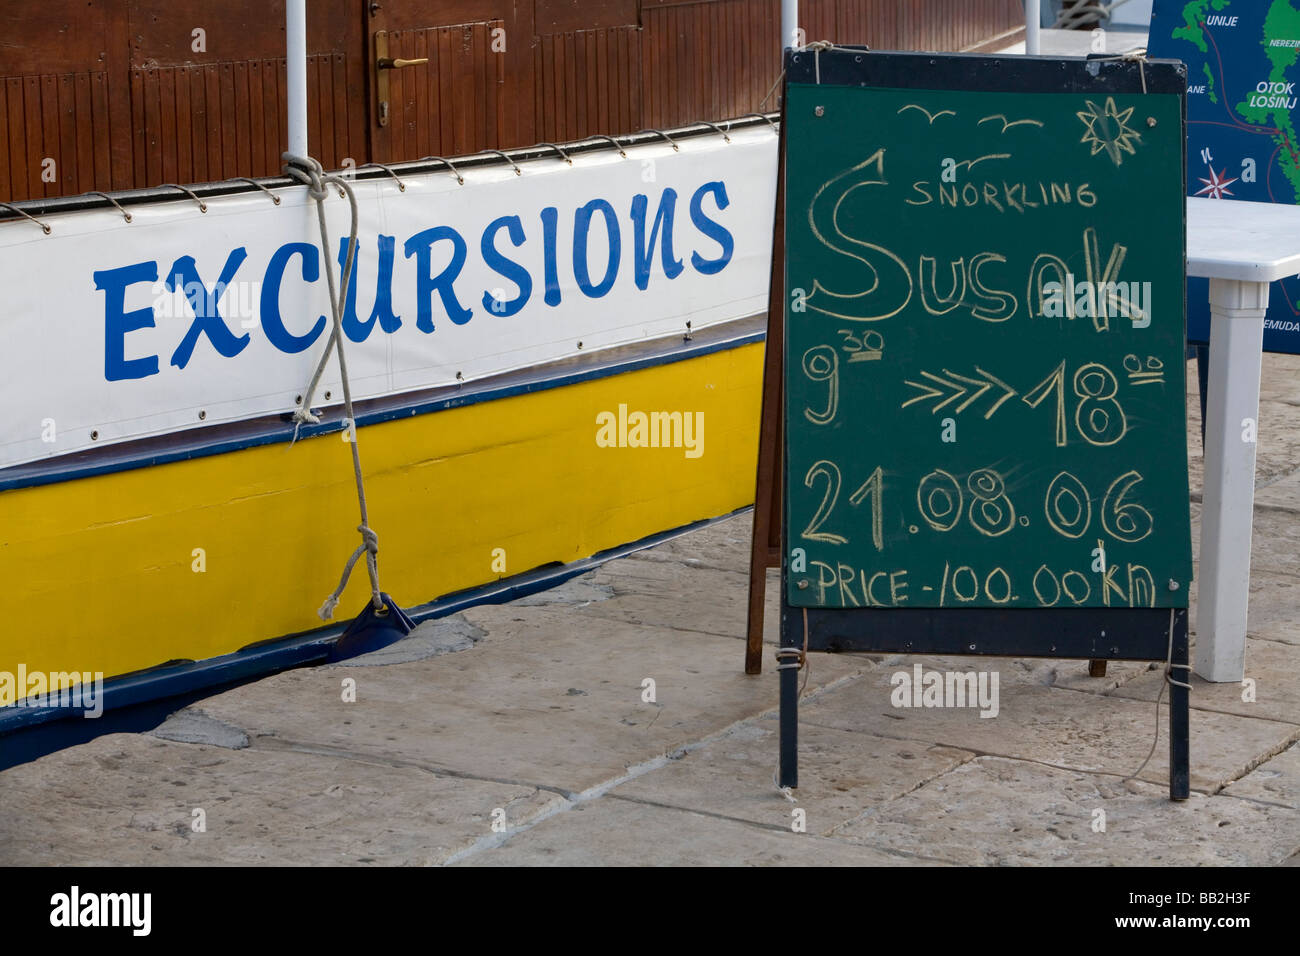 Traveling Croatia; Detail of a boat with a sign offering excursions. Stock Photo